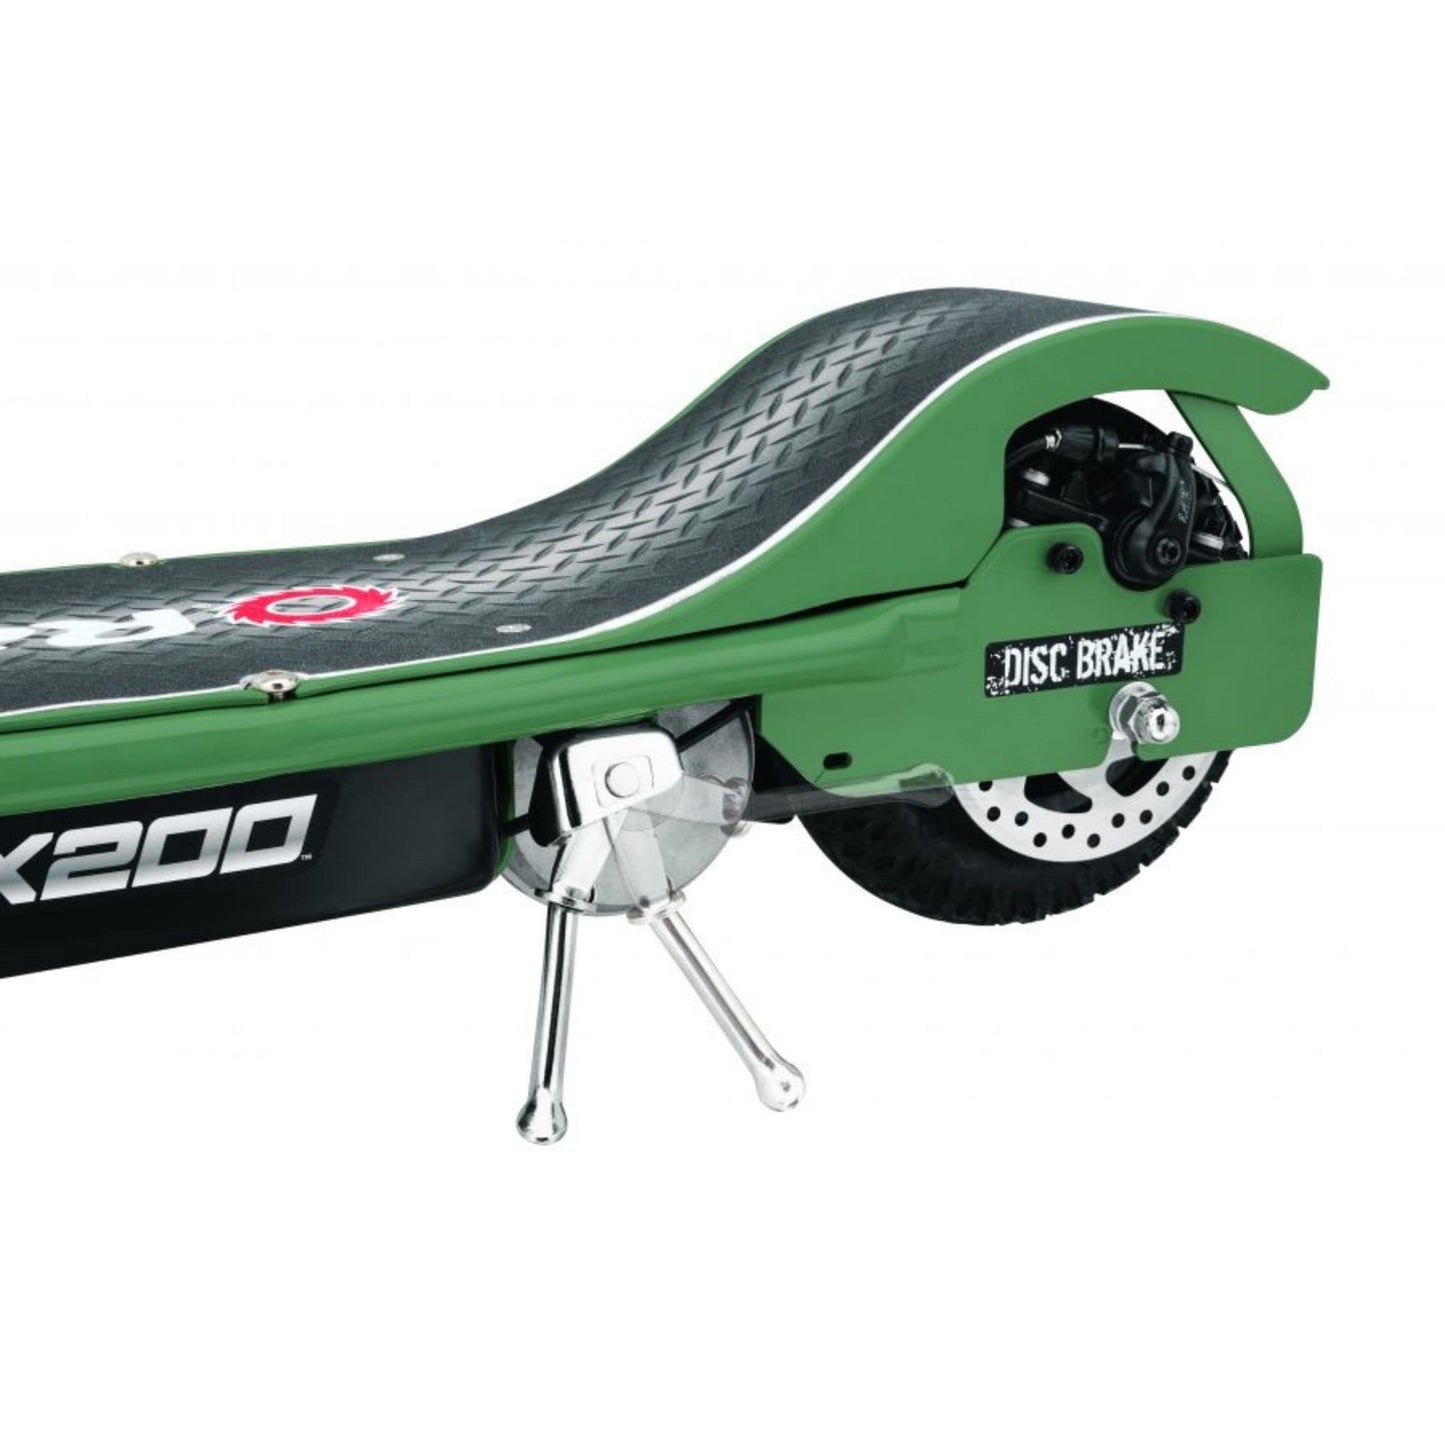 Razor RX200 Electric Scooter